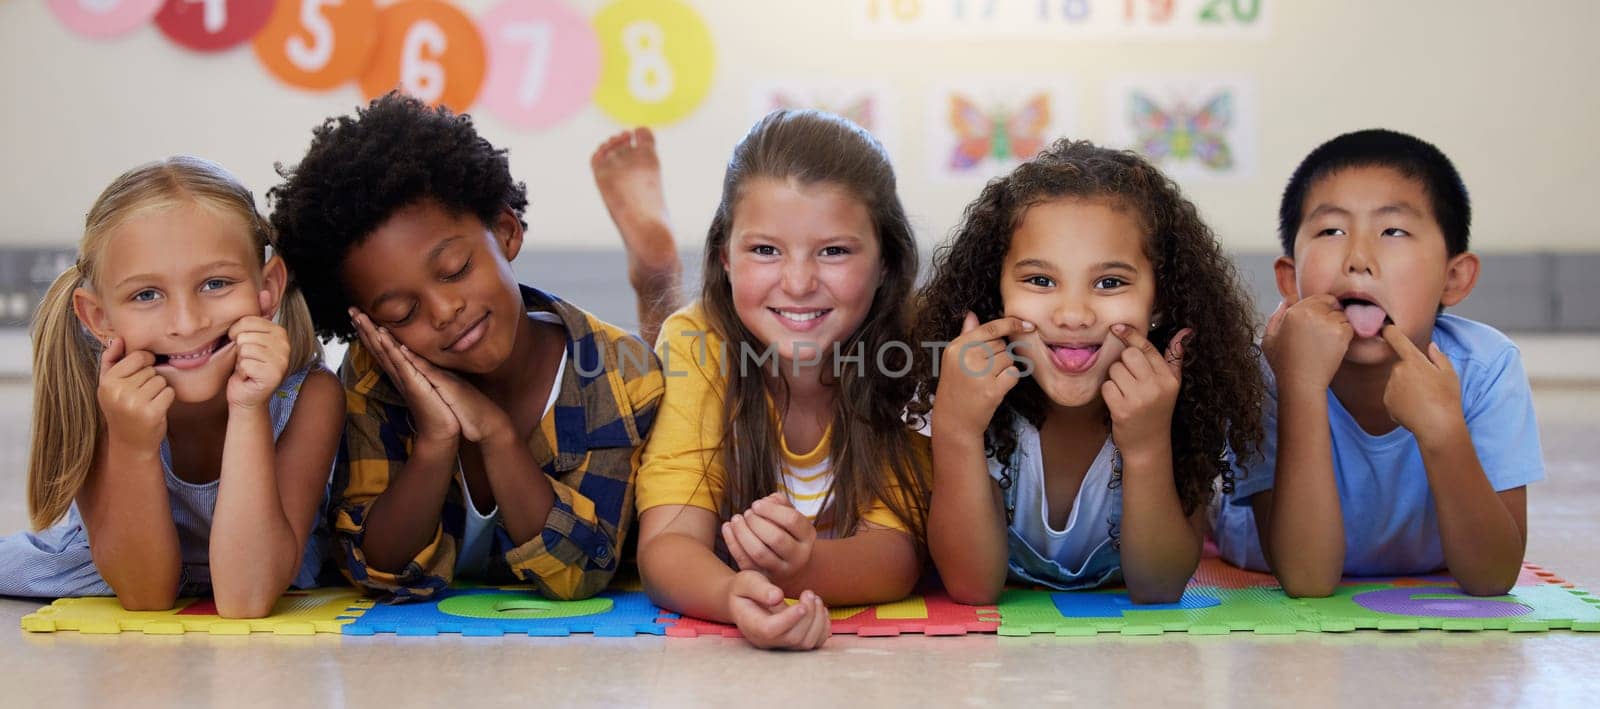 Kids, floor and group portrait with funny face in school classroom, solidarity or diversity in childhood. Girl, boy and children in class, academy and happy multicultural friends, together or playful by YuriArcurs